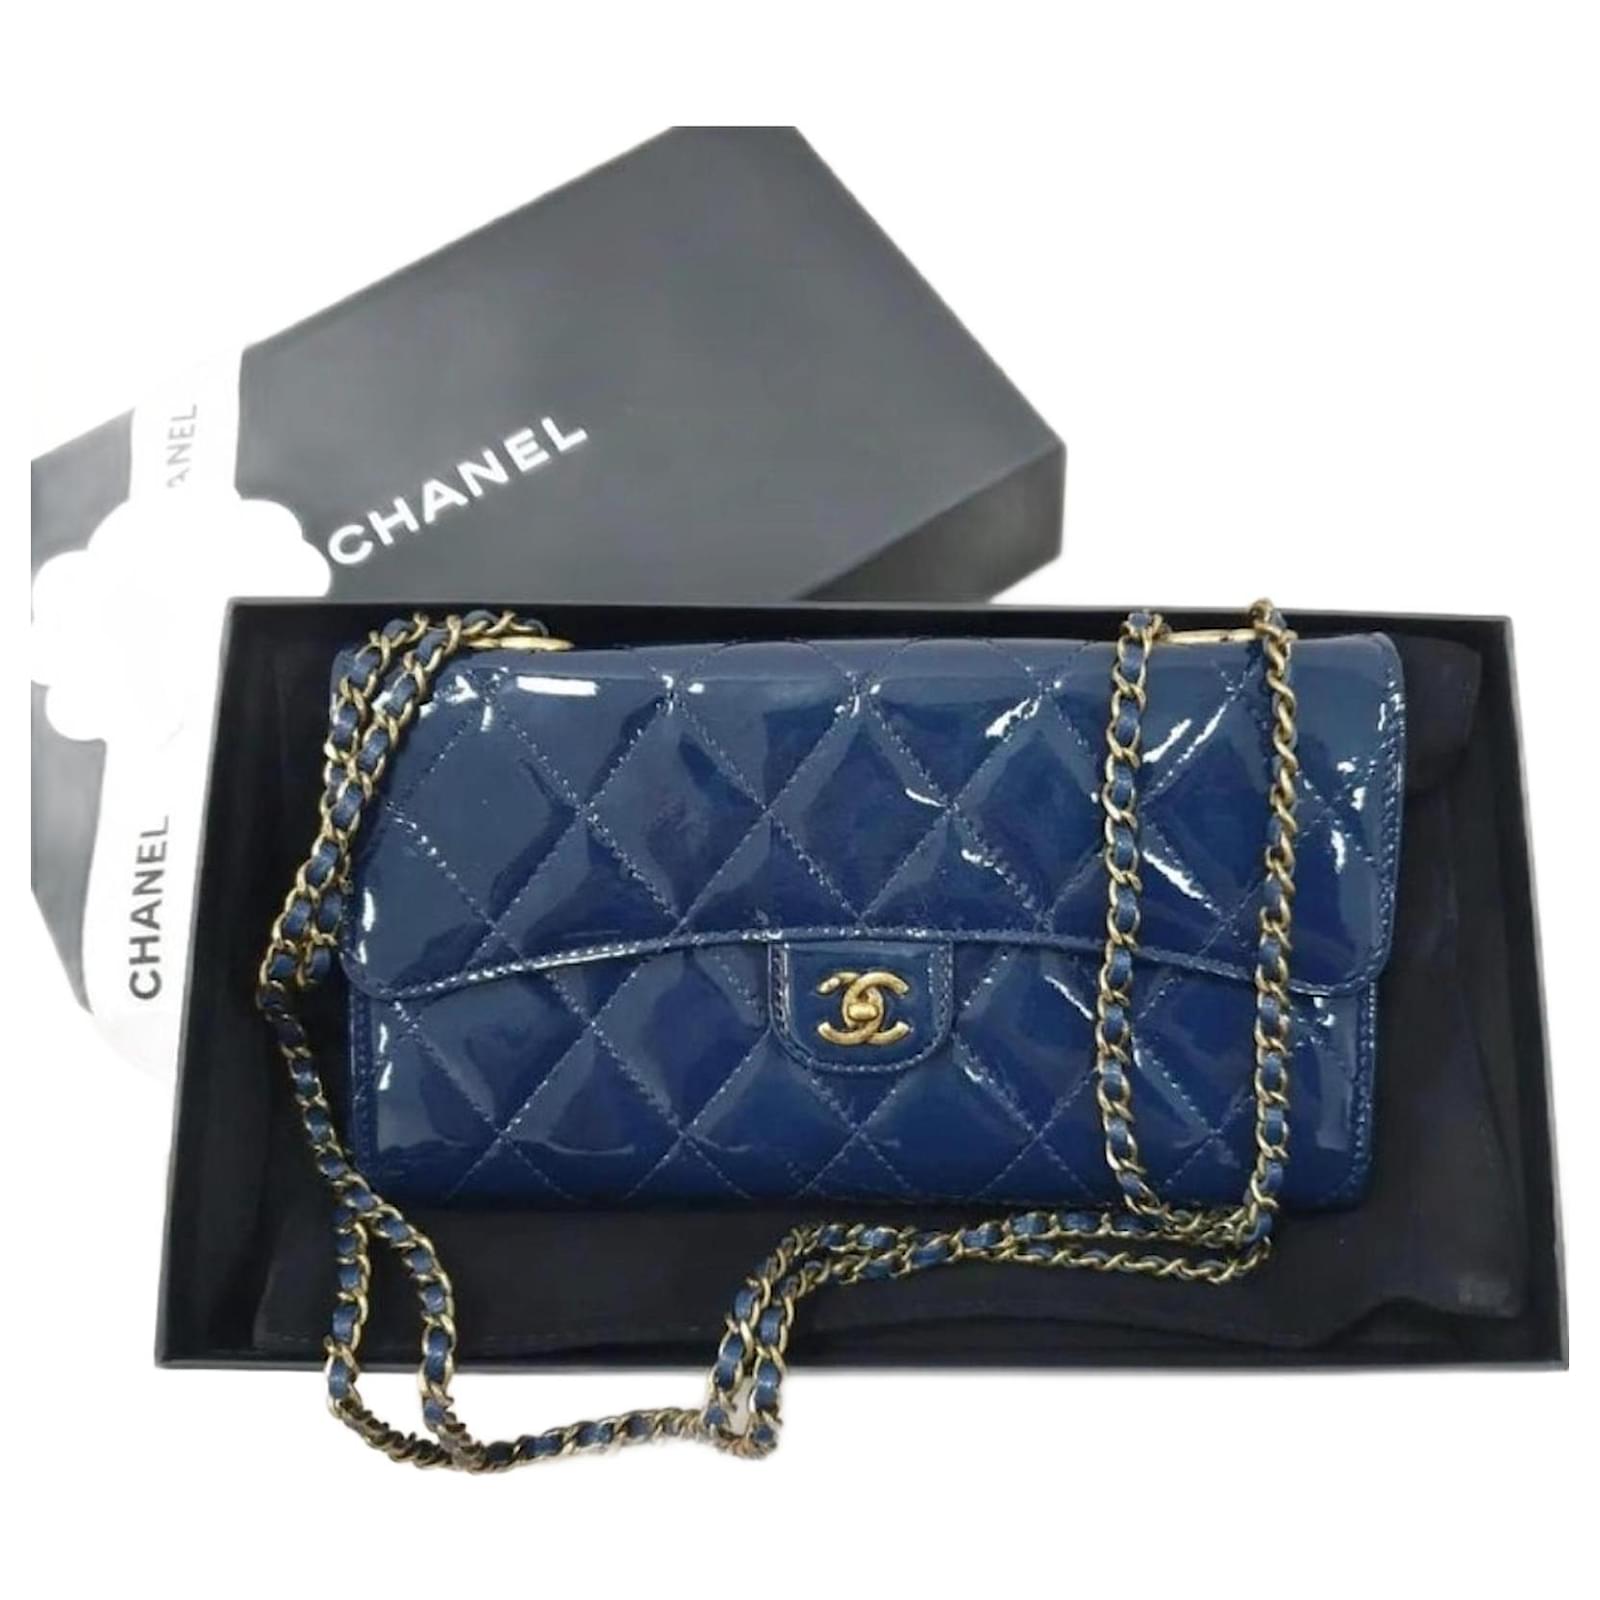 Handbags Chanel Chanel Navy Patent Eyelet Wallet on Chain